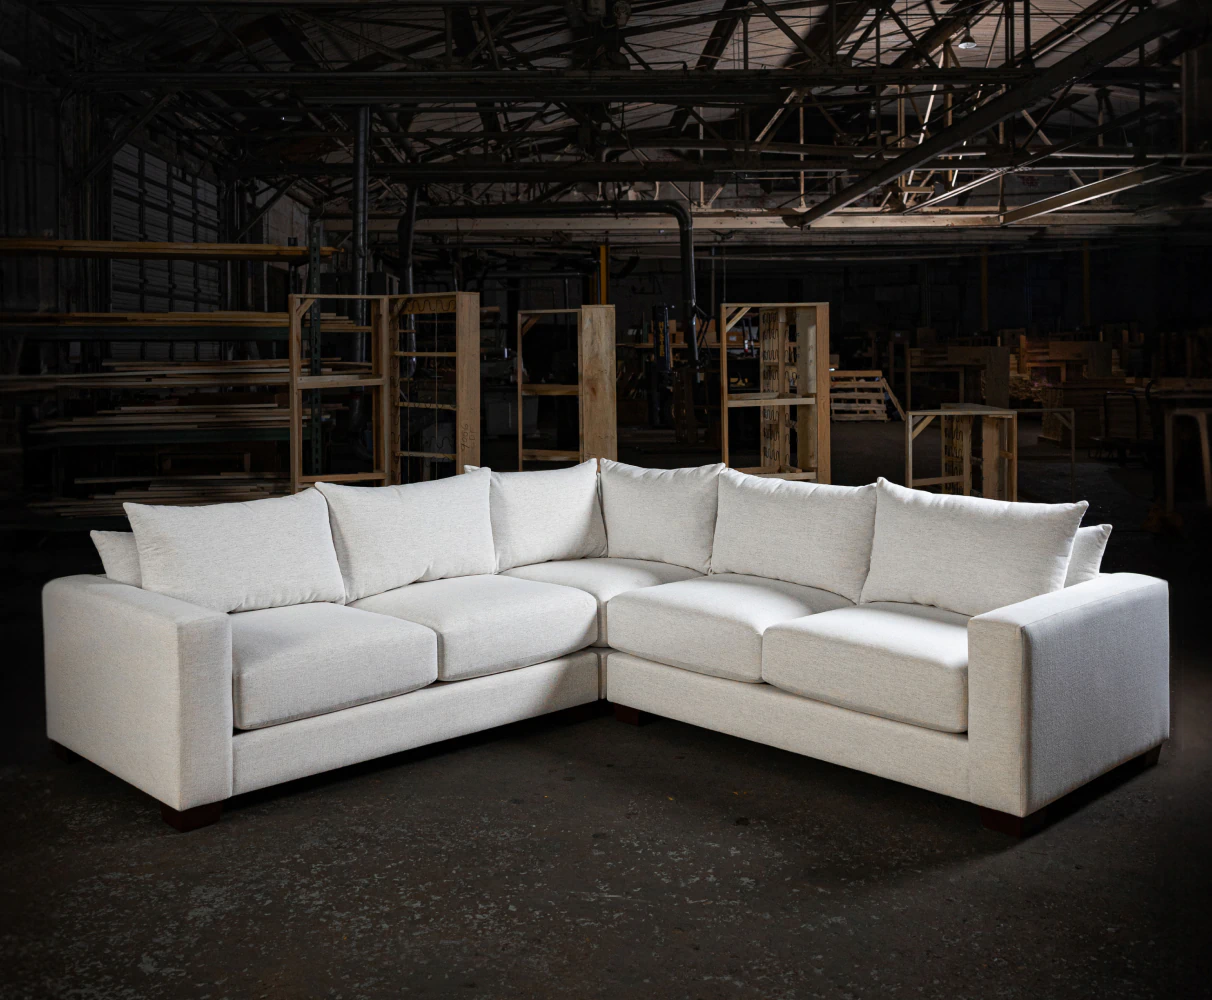 white sectional in a dark warehouse